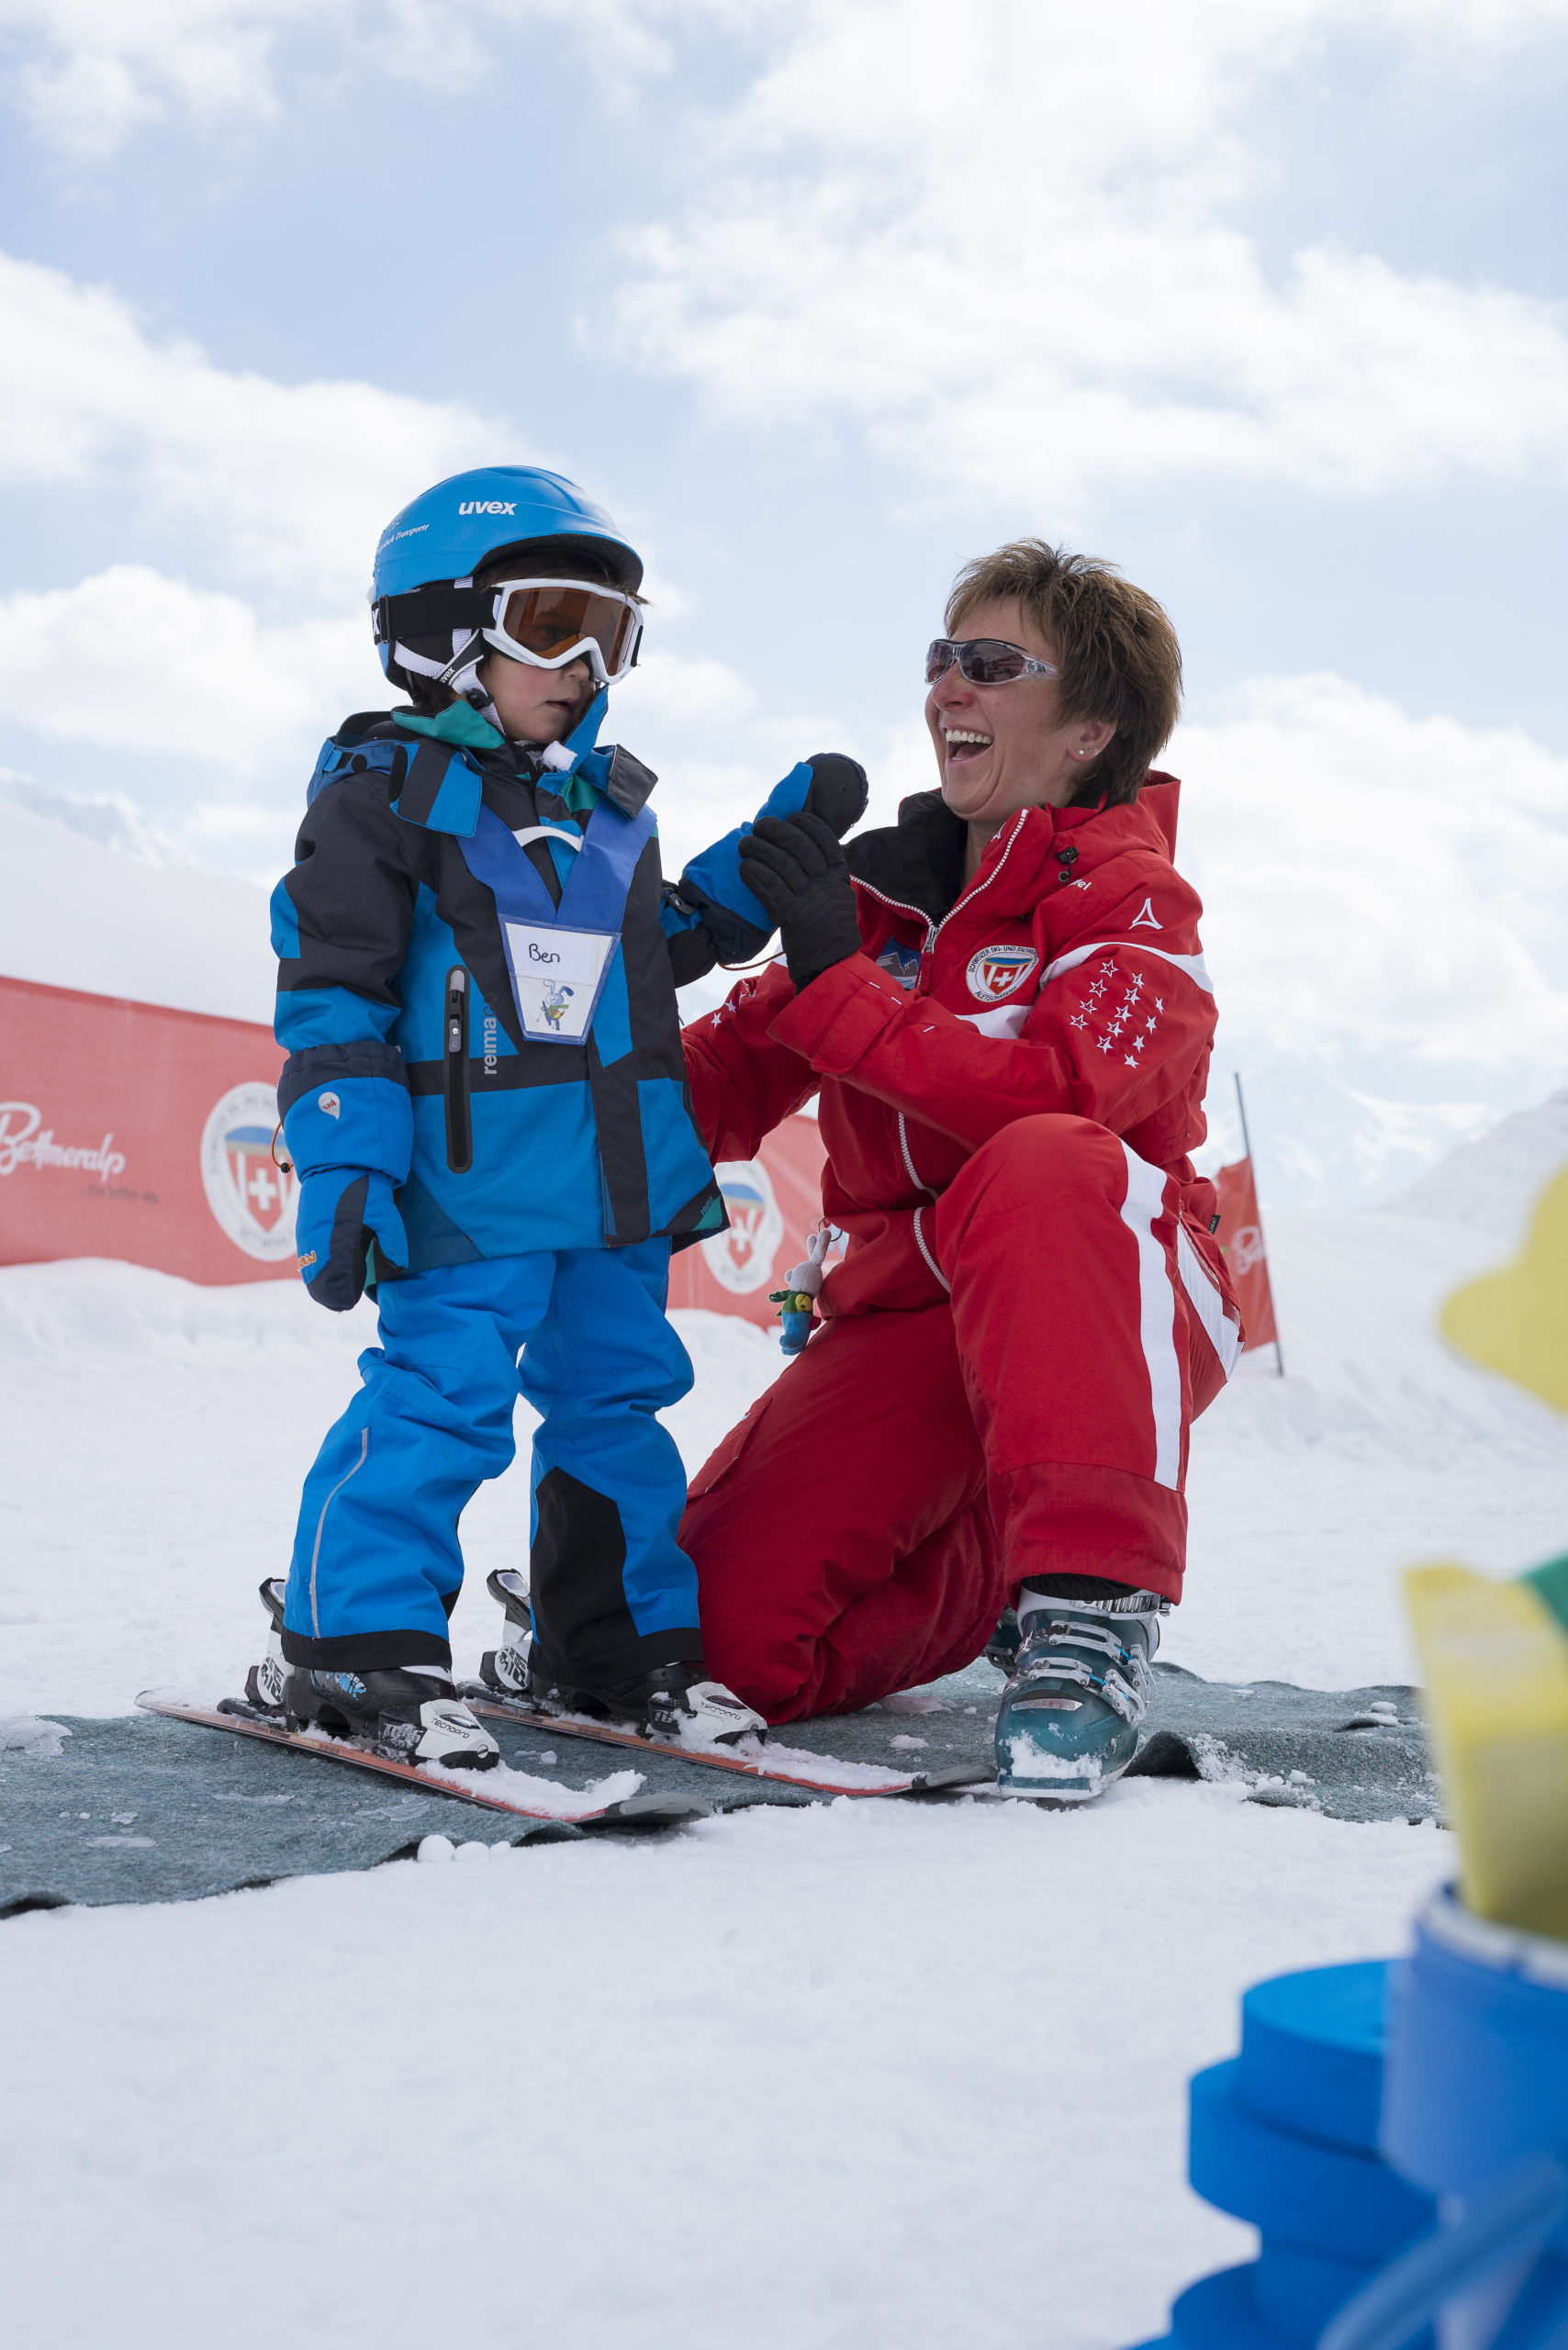 Sabine Haldemann from Bettmeralp laughs with one of her students during ski lessons